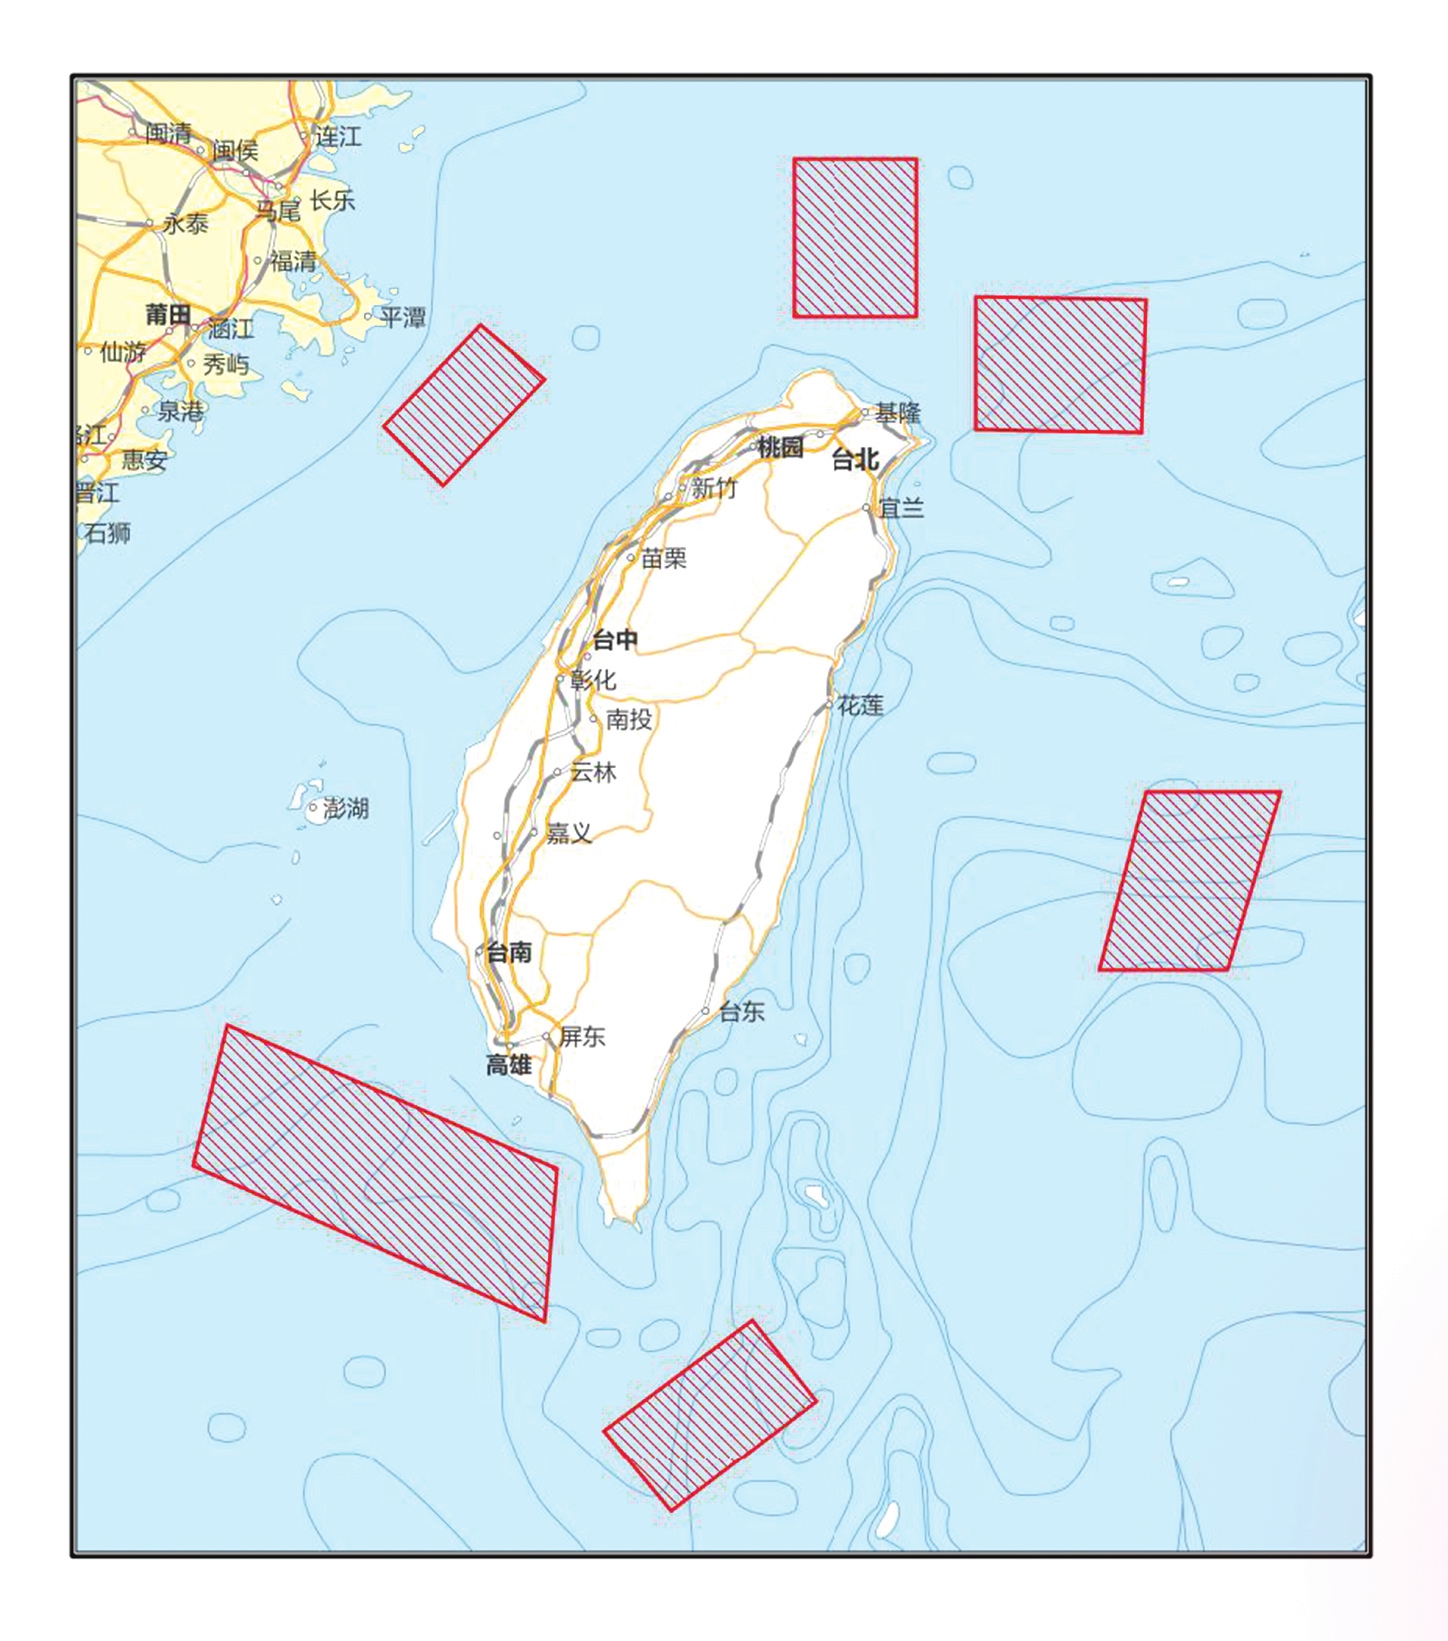 A sketch map shows the six regions where the People's Liberation Army will conduct important military exercises and training activities including live-fire drills surrounding the Taiwan island from August 4 to 7, 2022. Photo: Xinhua